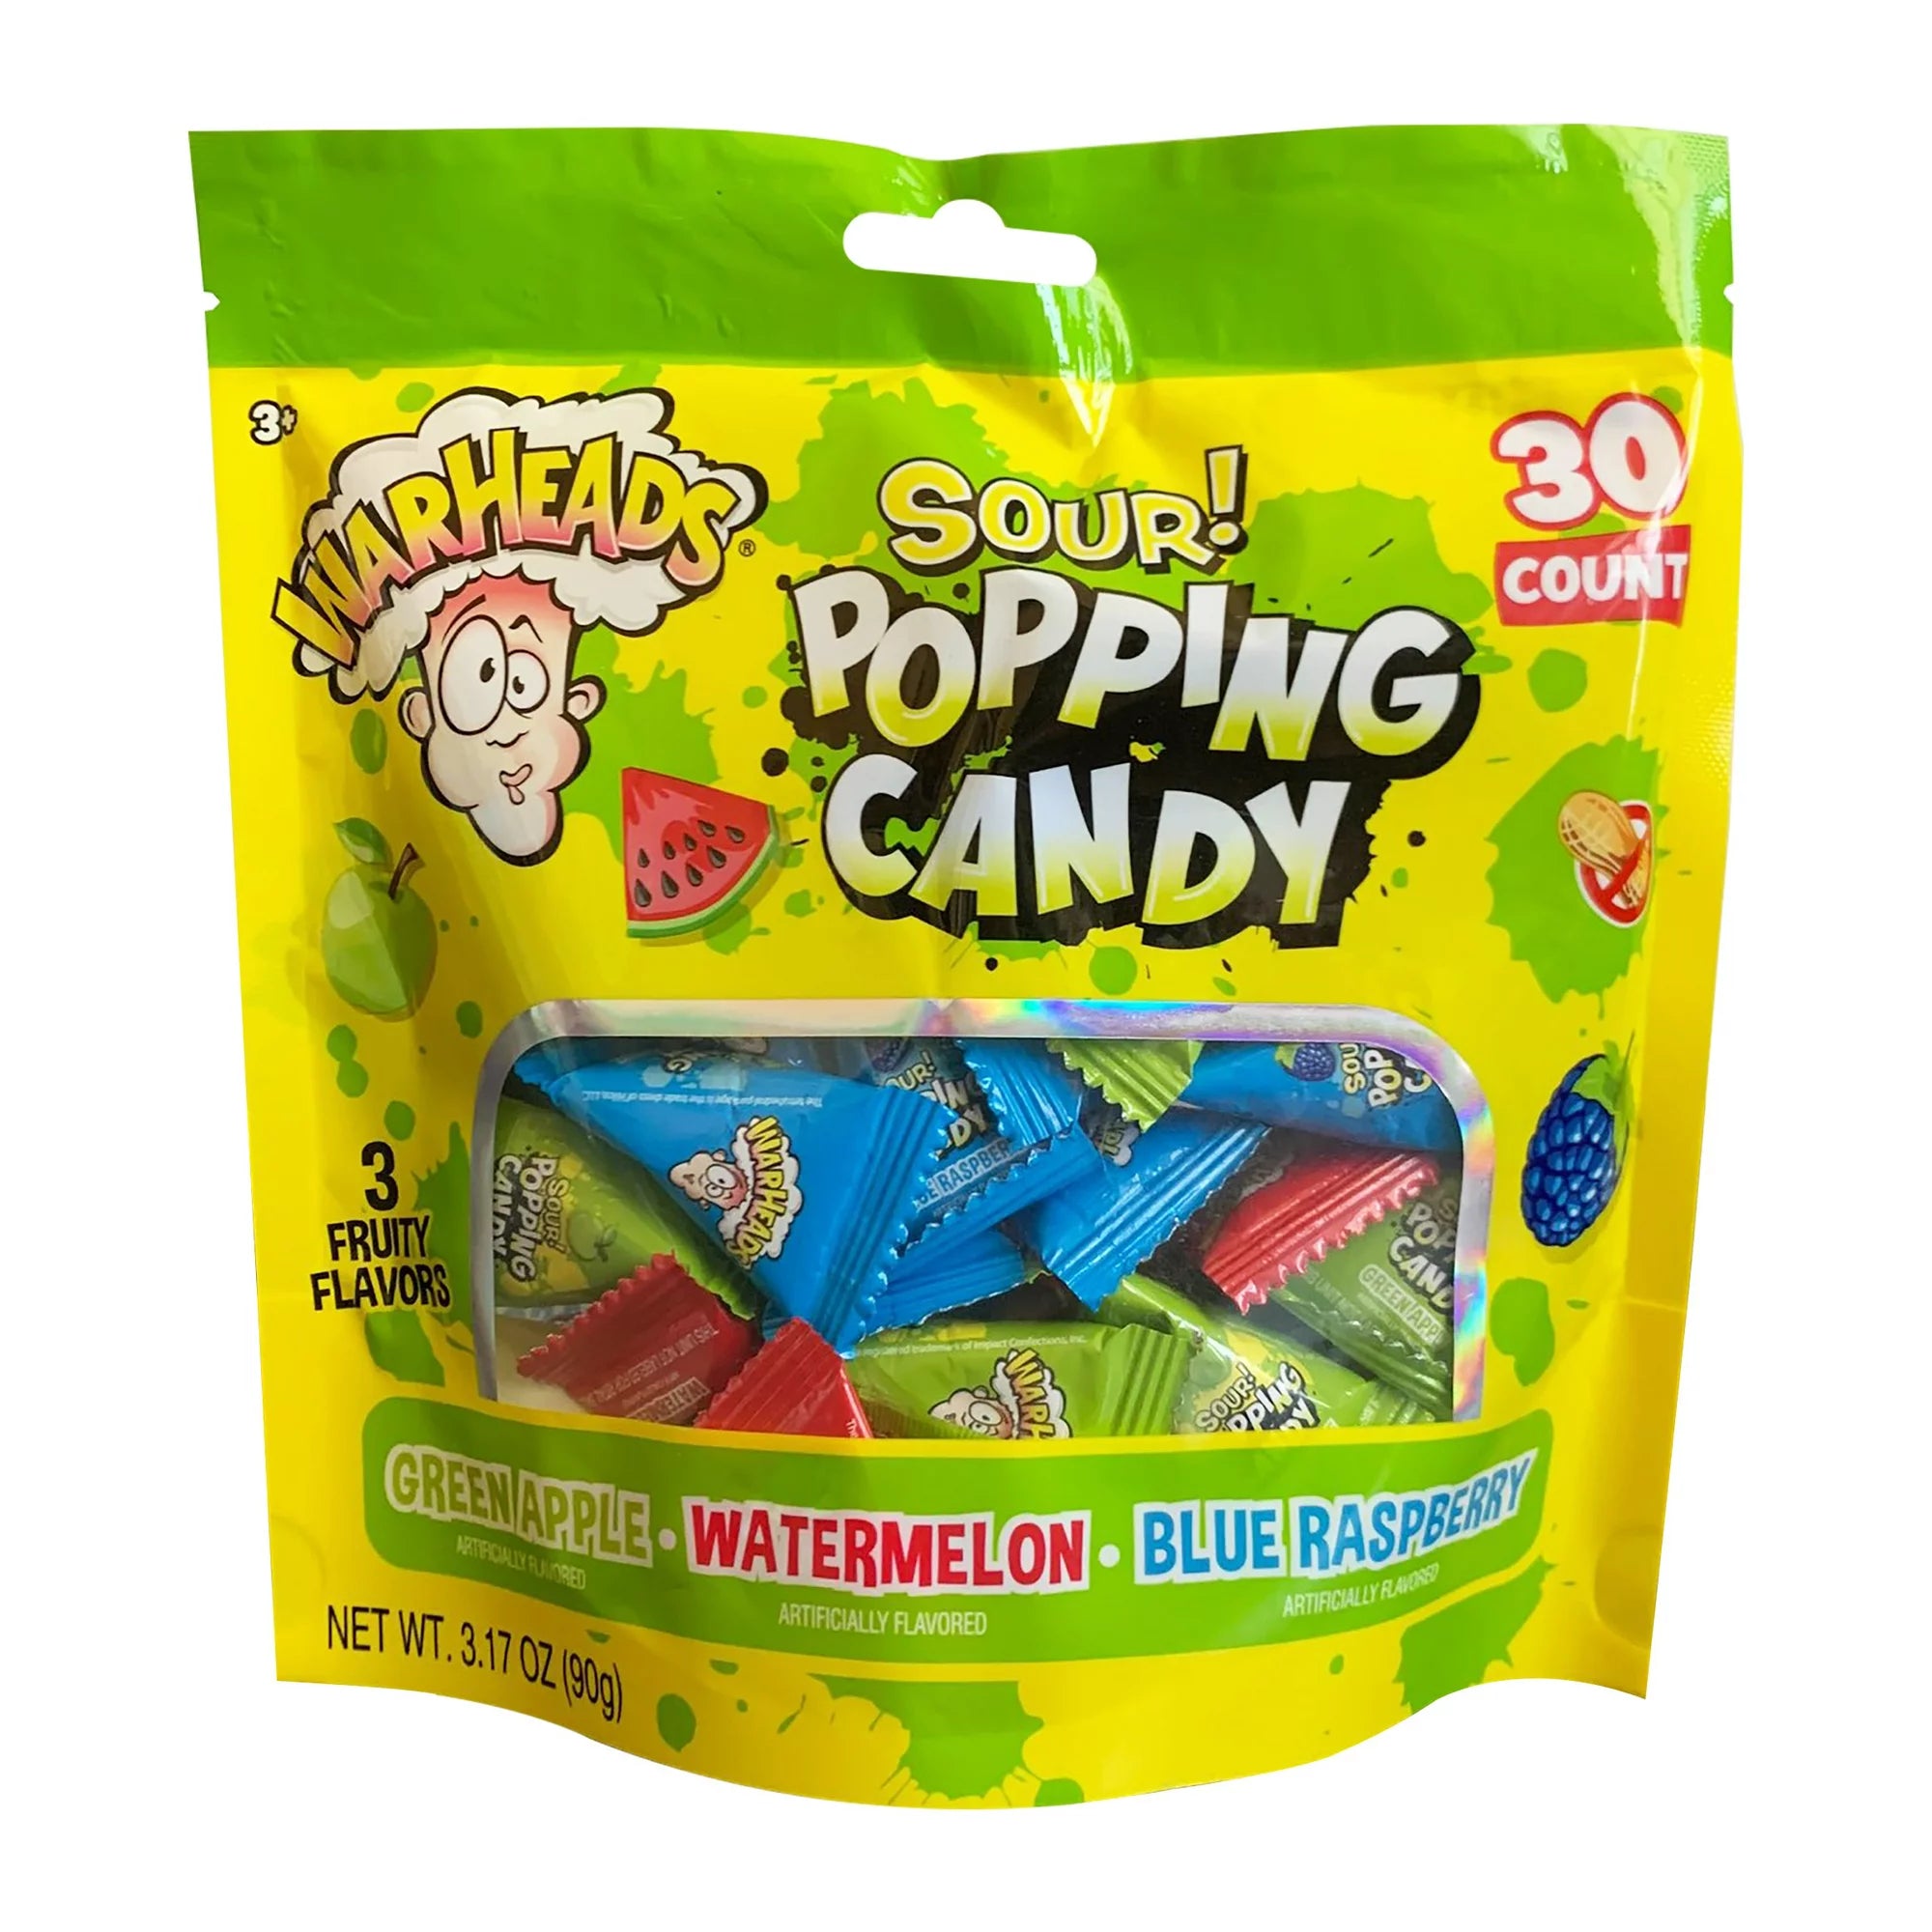 Warheads Sour Popping Candy Assorted Flavors, 3.17 oz, 30 Count